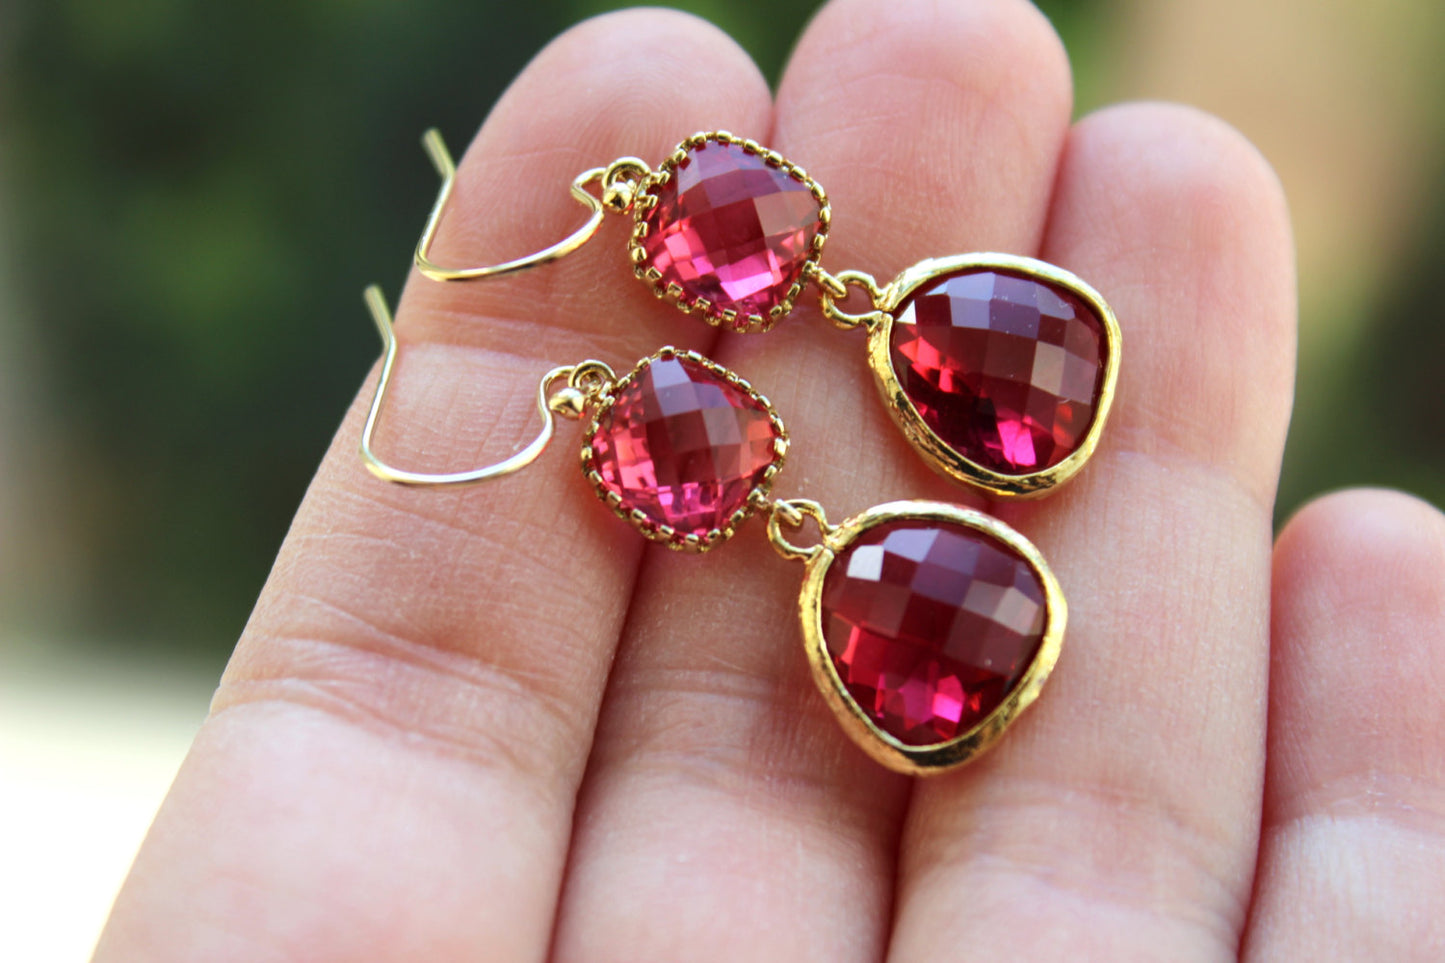 Gold Fuchsia Earrings Pink Two Tiered Jewelry - Hot Pink Wedding Jewelry - Fuchsia Bridesmaid Earrings Gift Bridal Jewelry - Gift Under 35